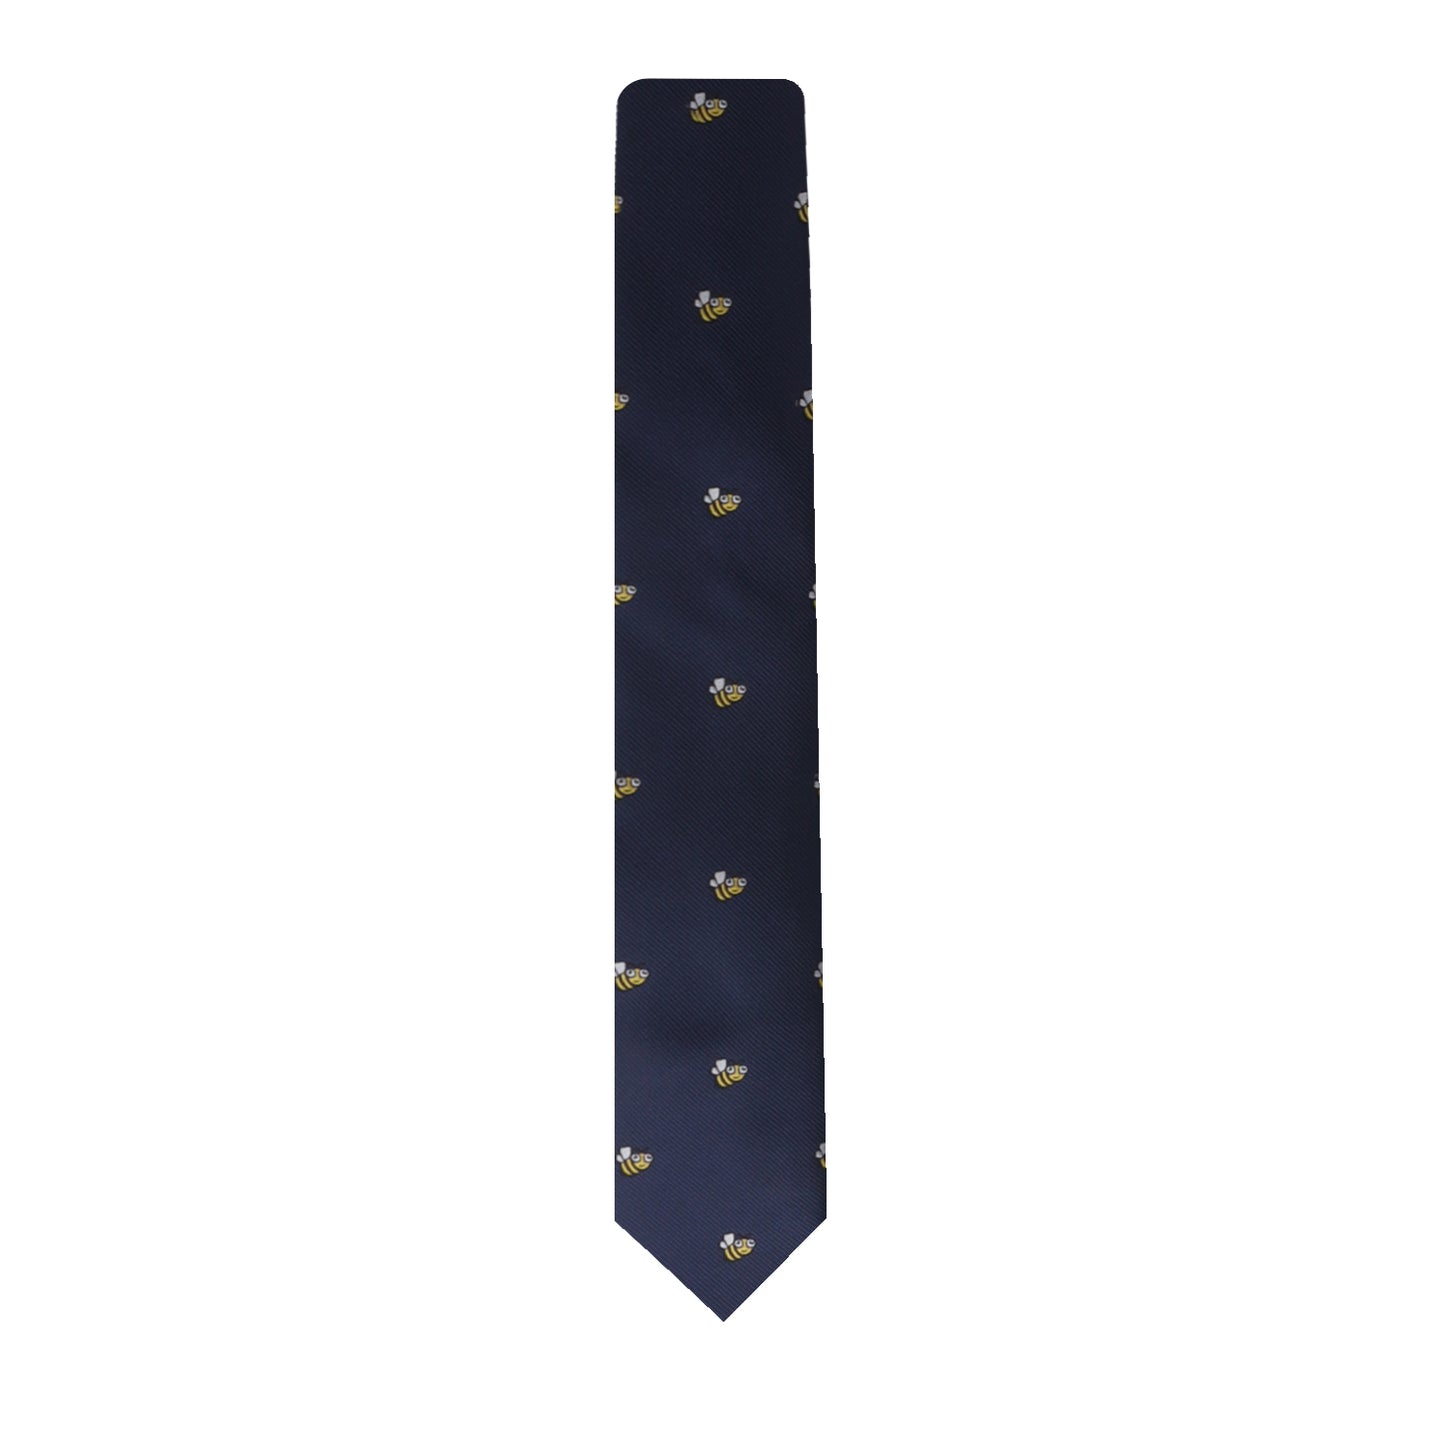 A stylish Bee Skinny Tie adorned with gold birds.